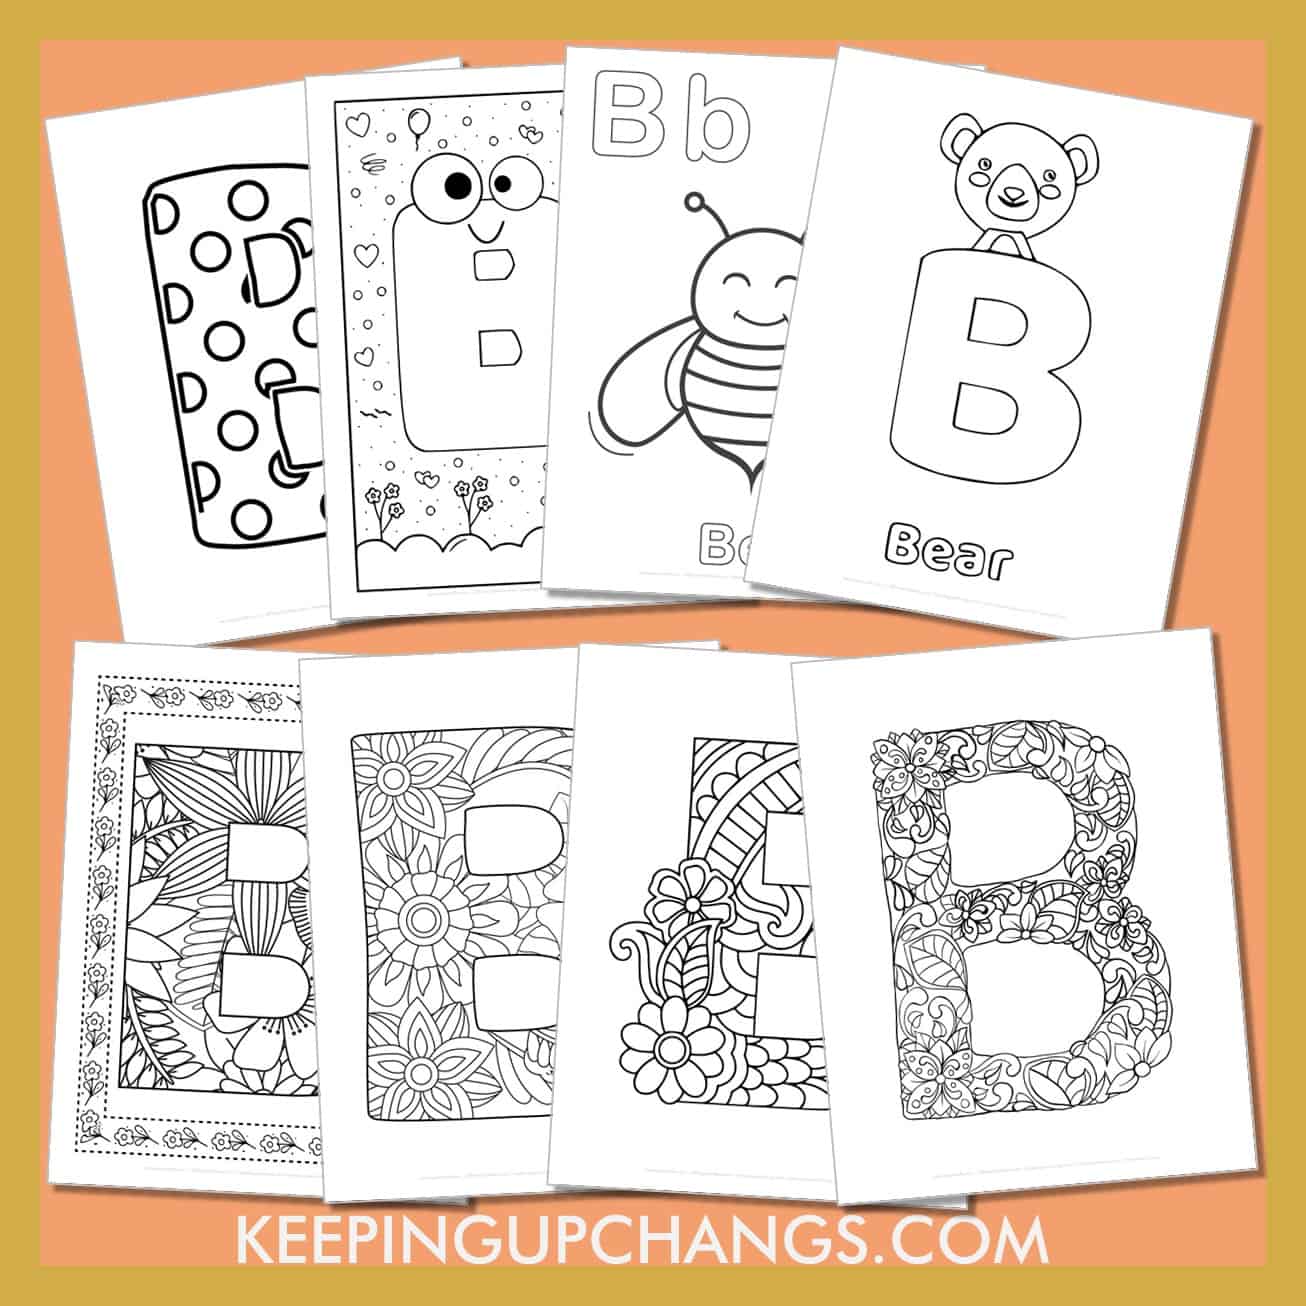 free alphabet letter b to color for toddlers, preschool, kindergarten, to adults.